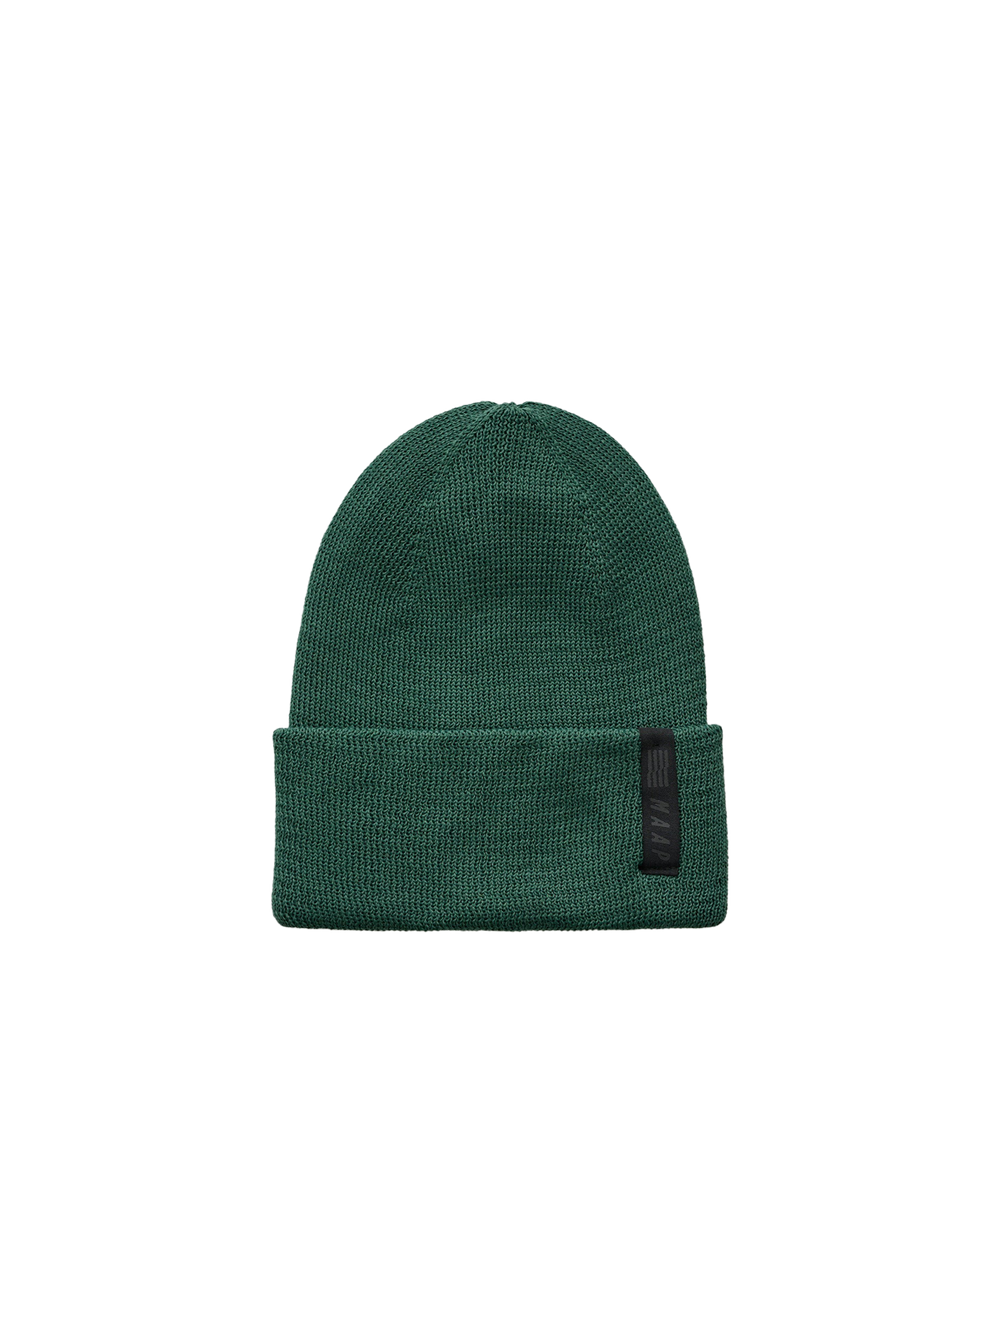 Product Image for Repreve Rib Beanie